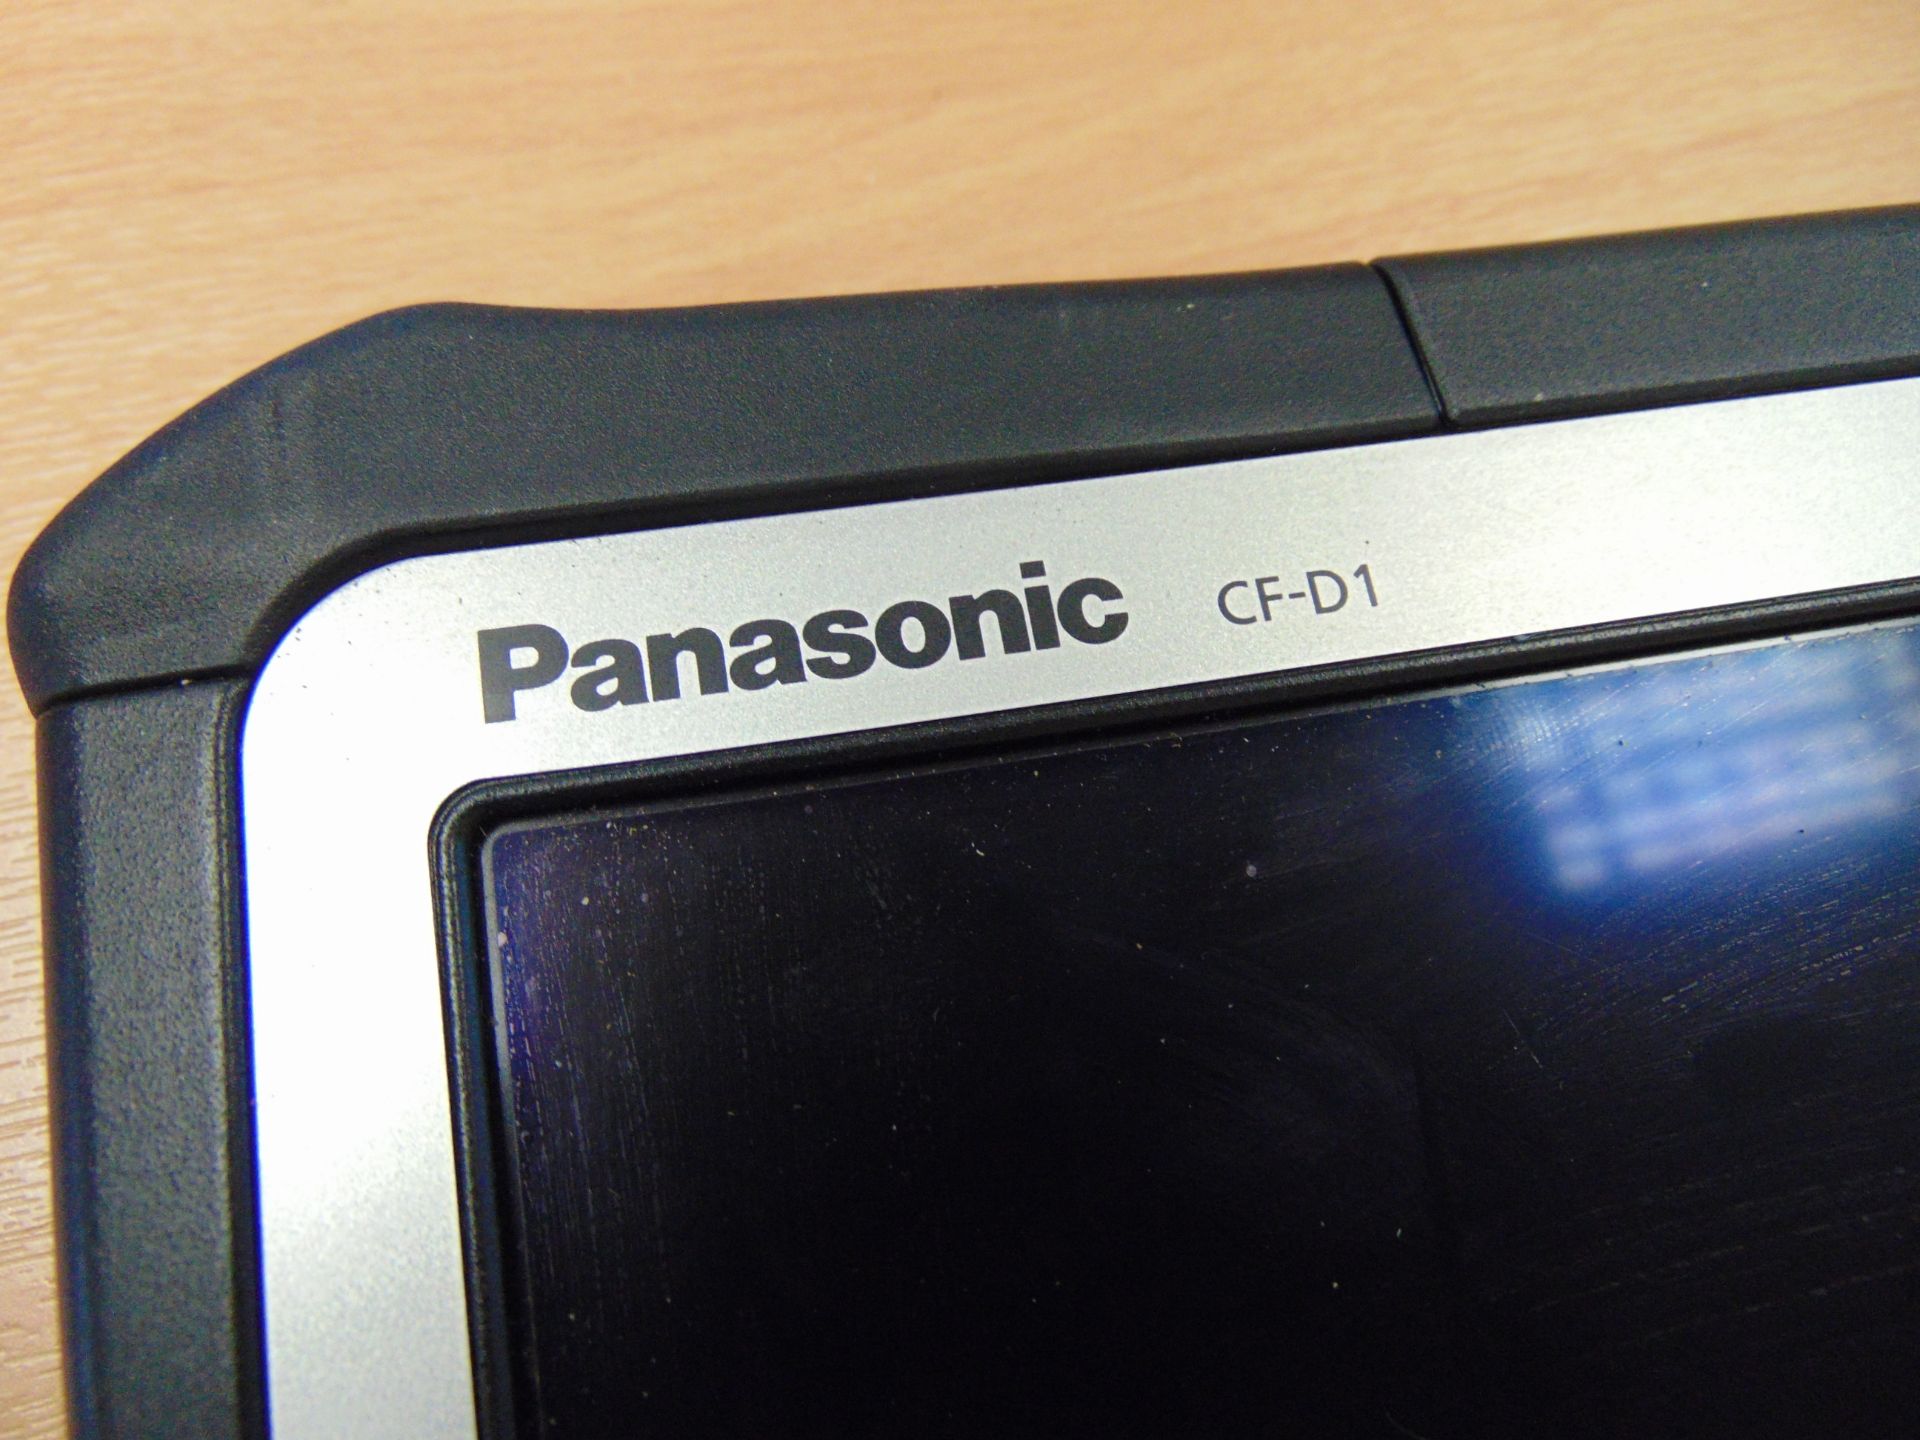 Panasonic Toughbook / Toughpad CF-D1 i5 Rugged Tablet - Image 3 of 6